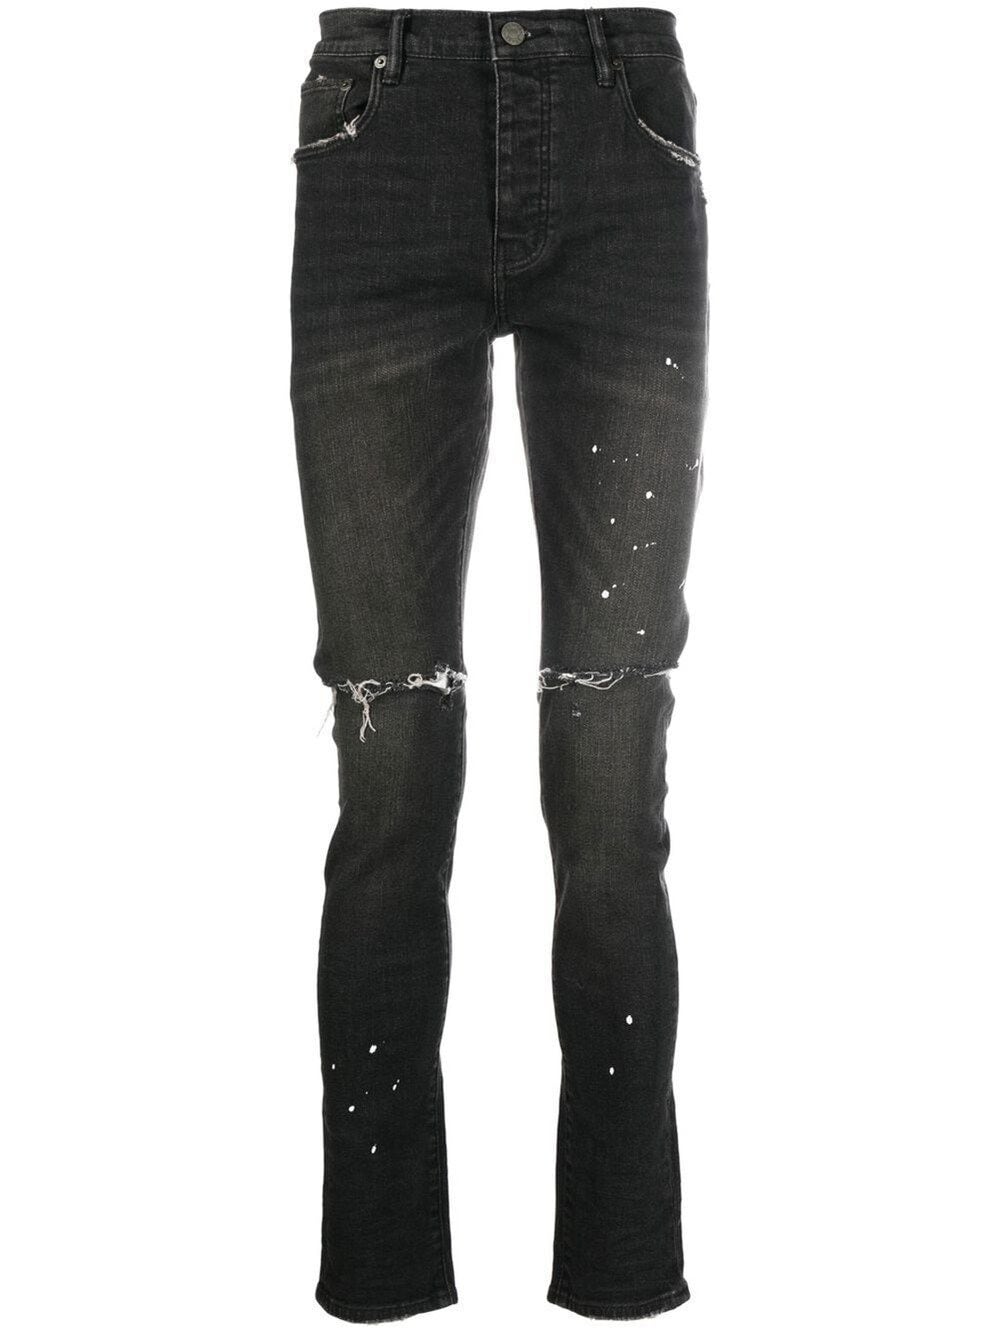 distressed ripped knee jeans, Purple Brand